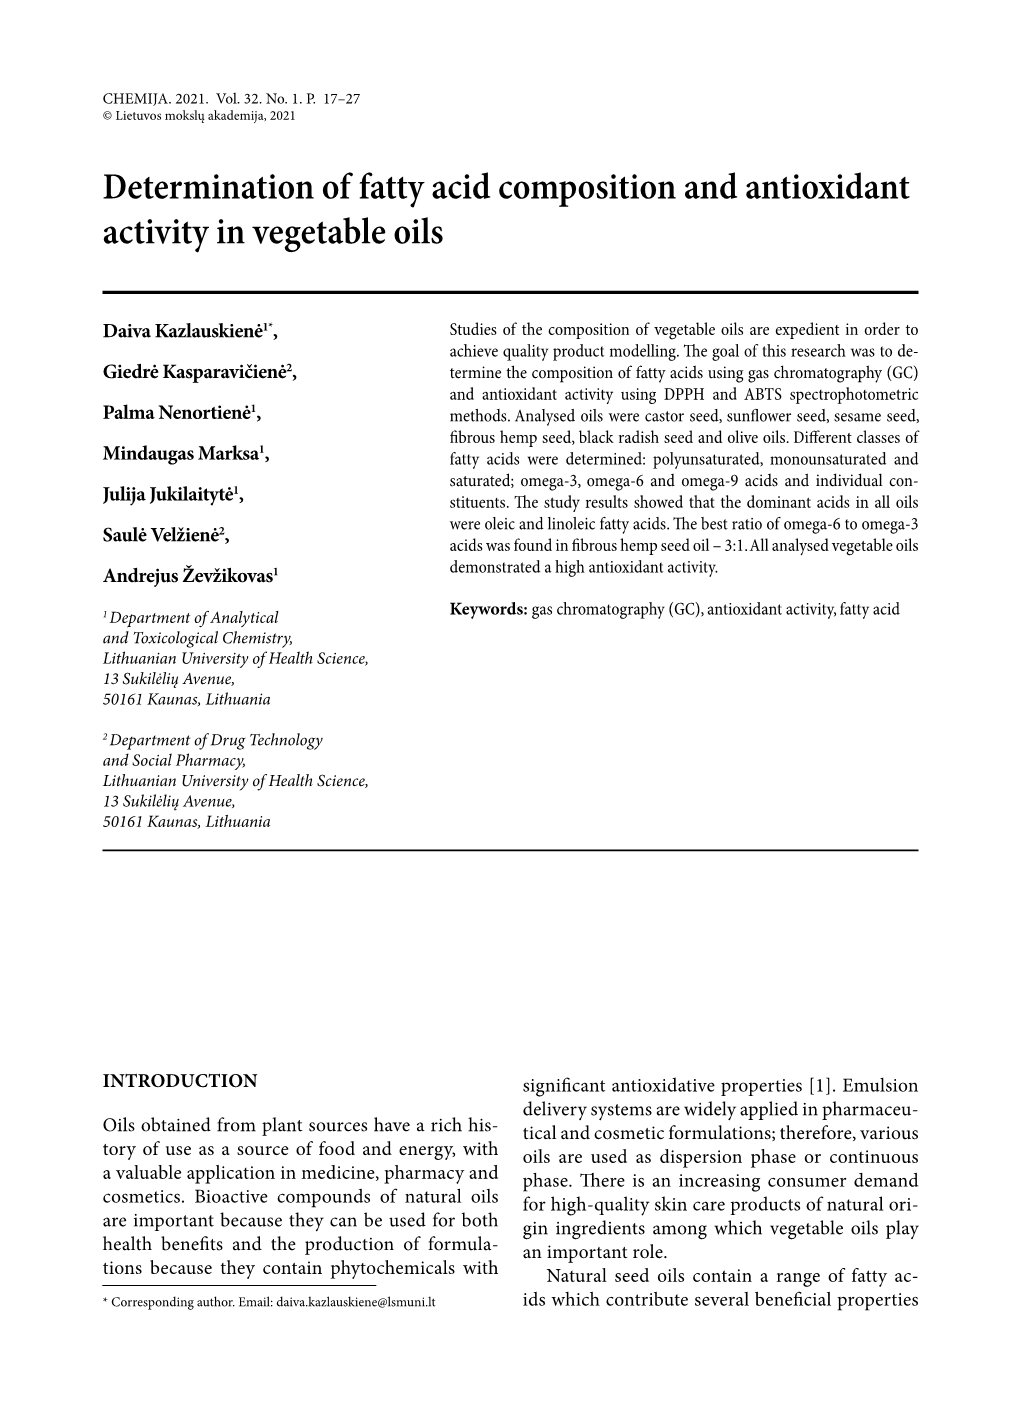 Determination of Fatty Acid Composition and Antioxidant Activity in Vegetable Oils